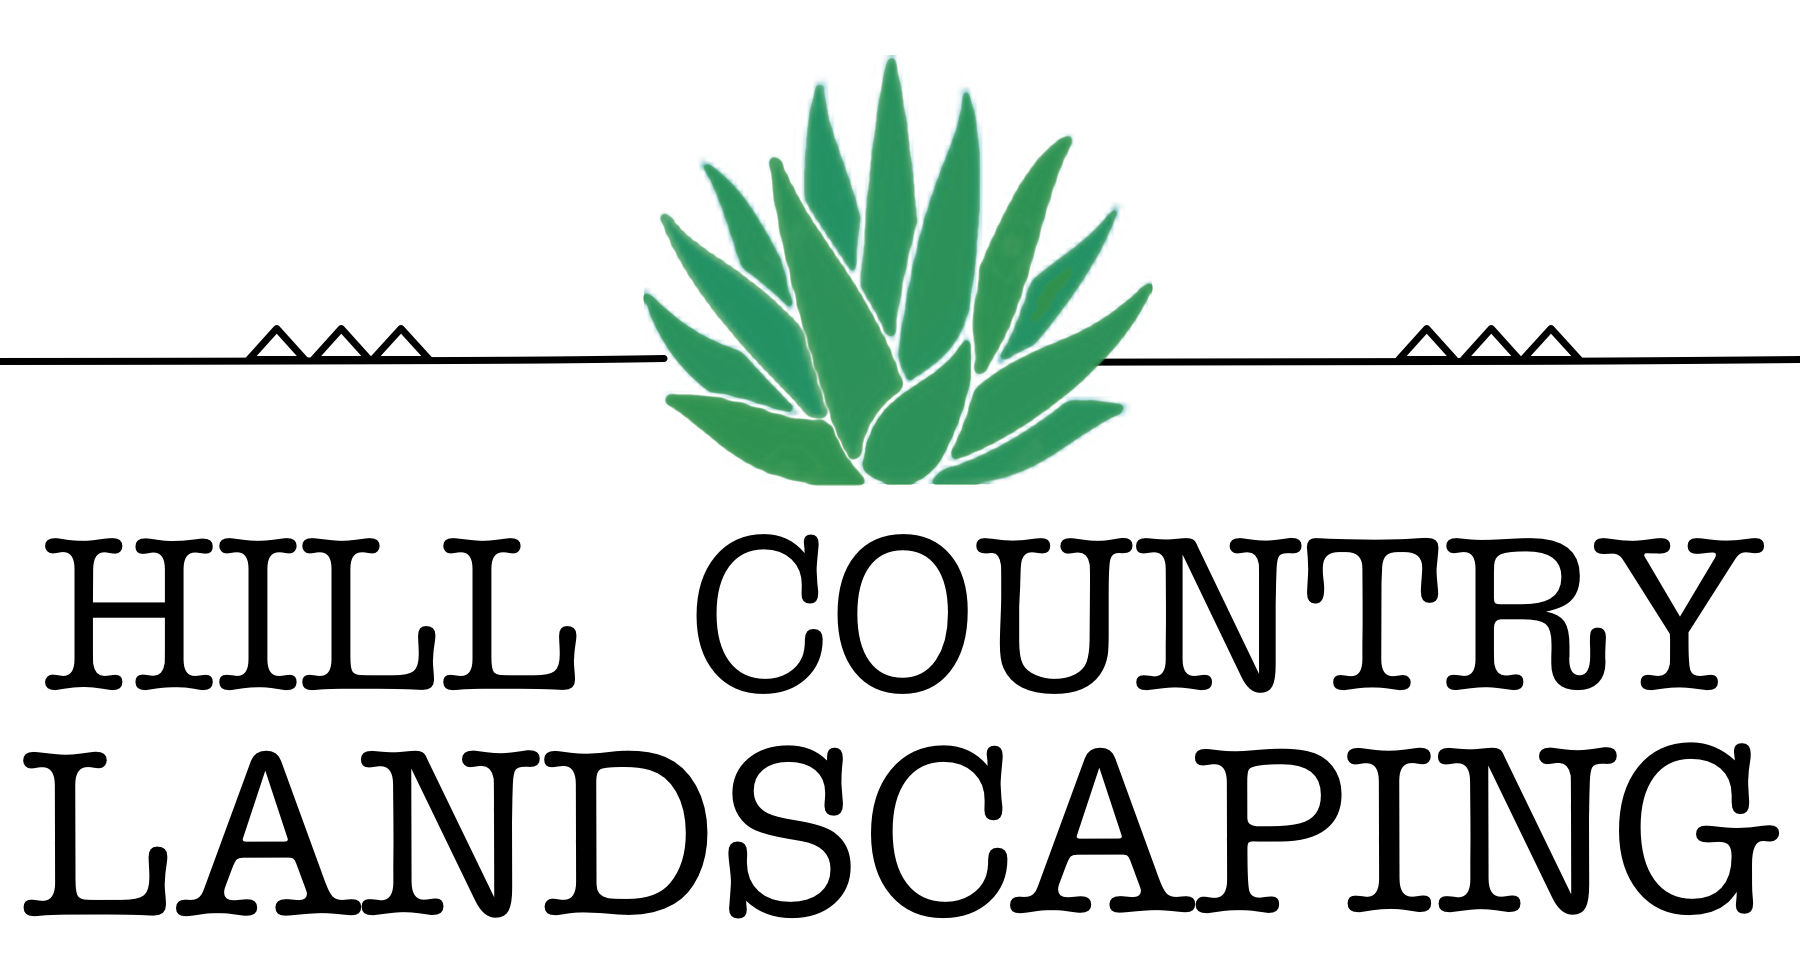 Hill Country Landscaping Logo